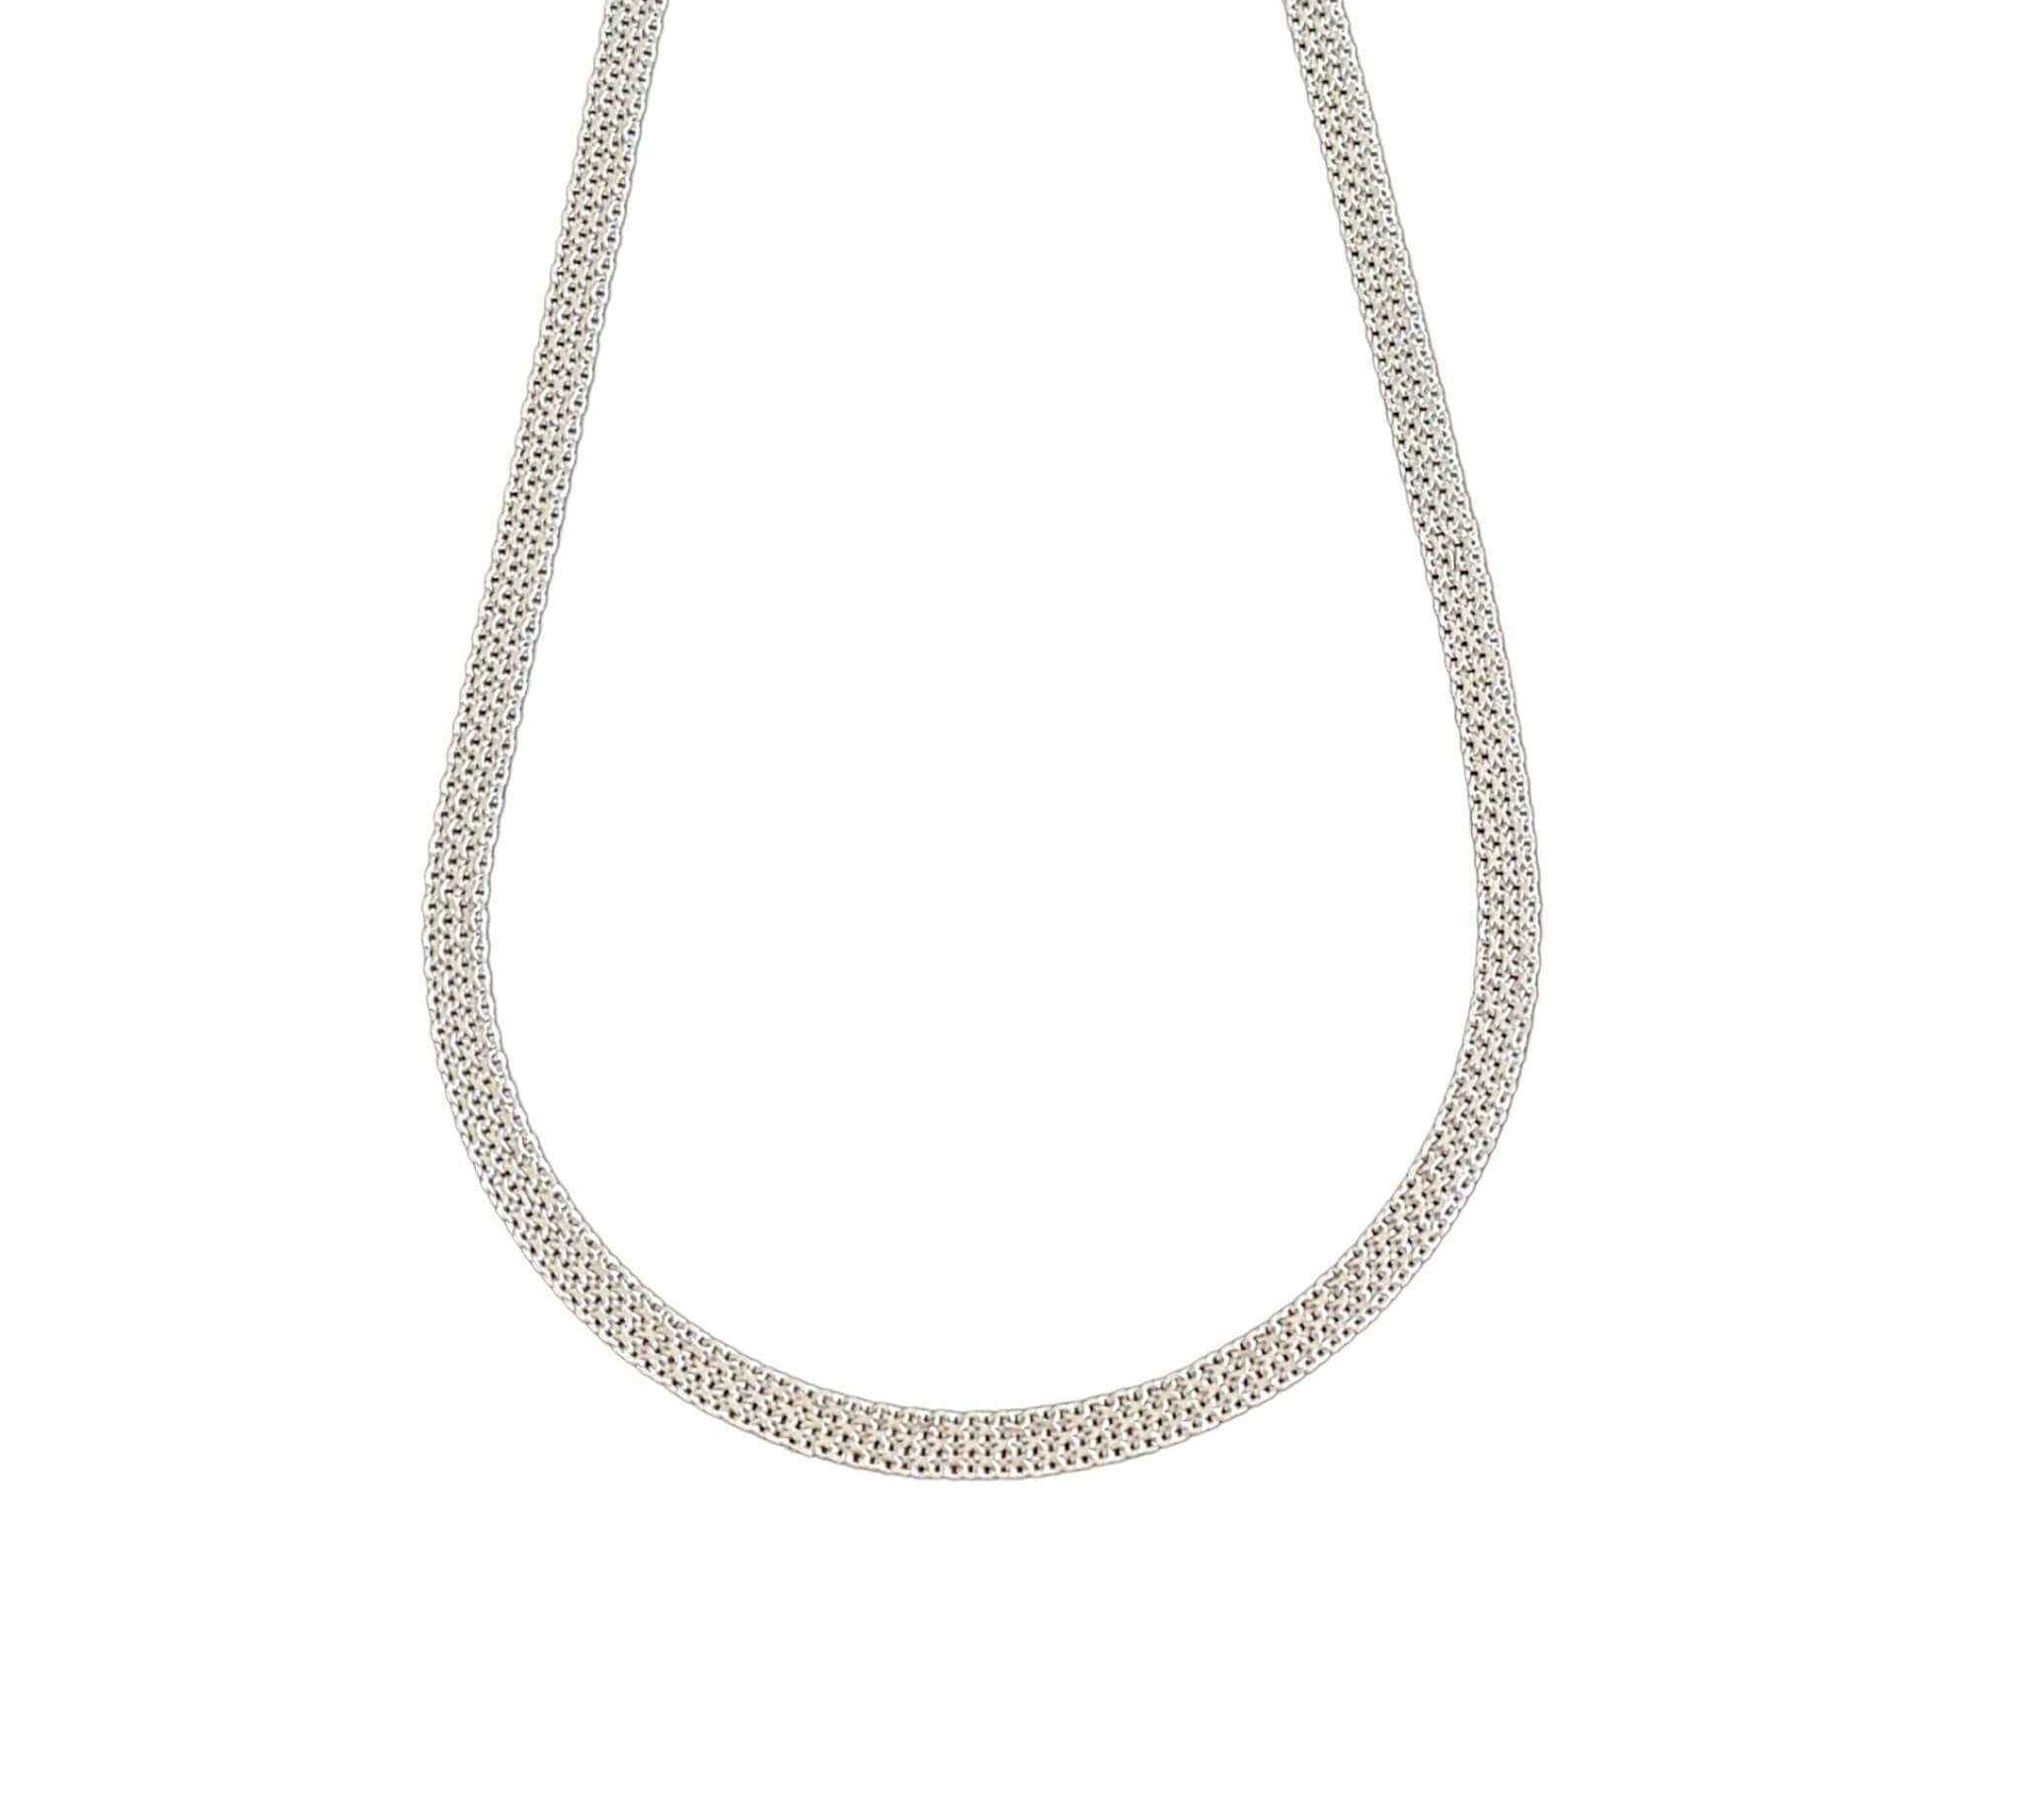 Timeless Silver Mesh Choker Necklace for Women by Alessandra James.